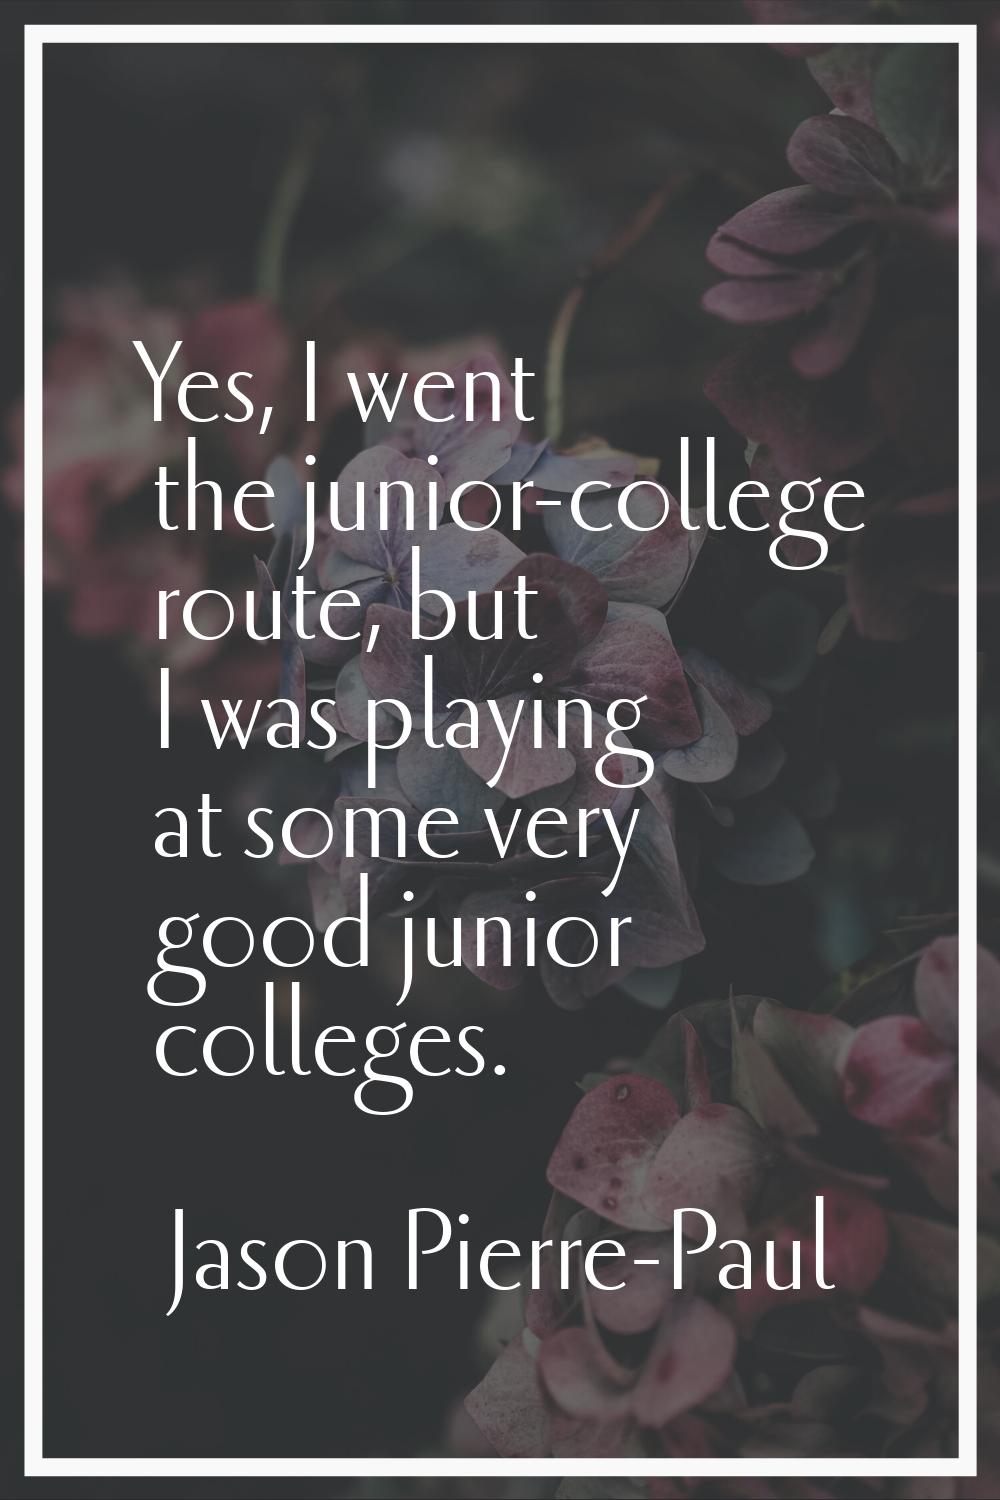 Yes, I went the junior-college route, but I was playing at some very good junior colleges.